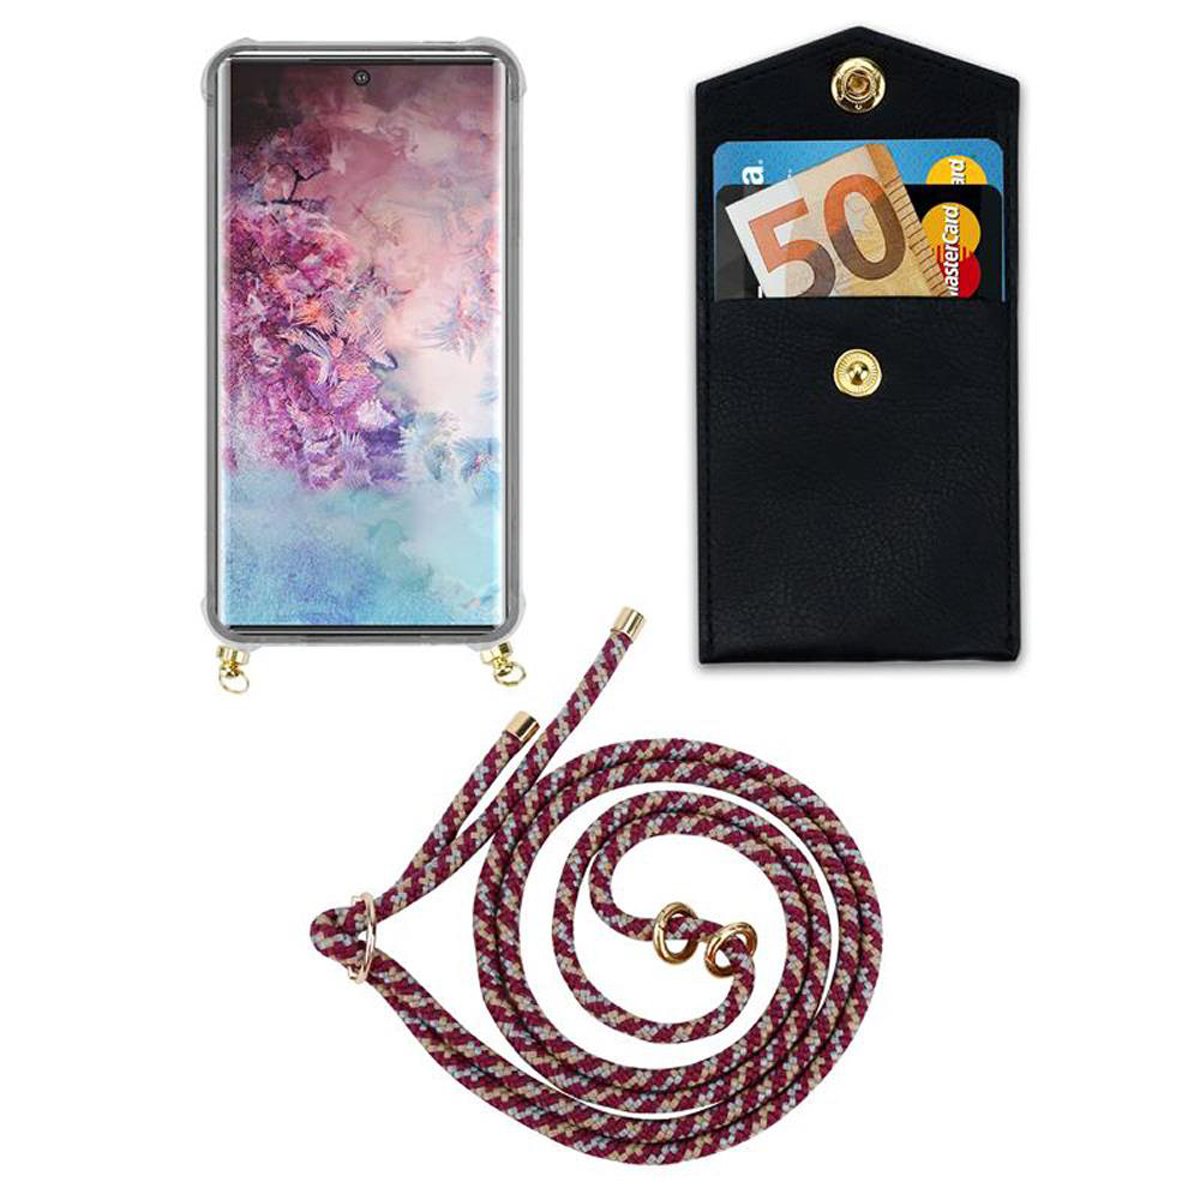 Hülle, mit ROT Backcover, NOTE Ringen, WEIß GELB Kordel 10 und abnehmbarer CADORABO PLUS, Band Galaxy Handy Kette Samsung, Gold